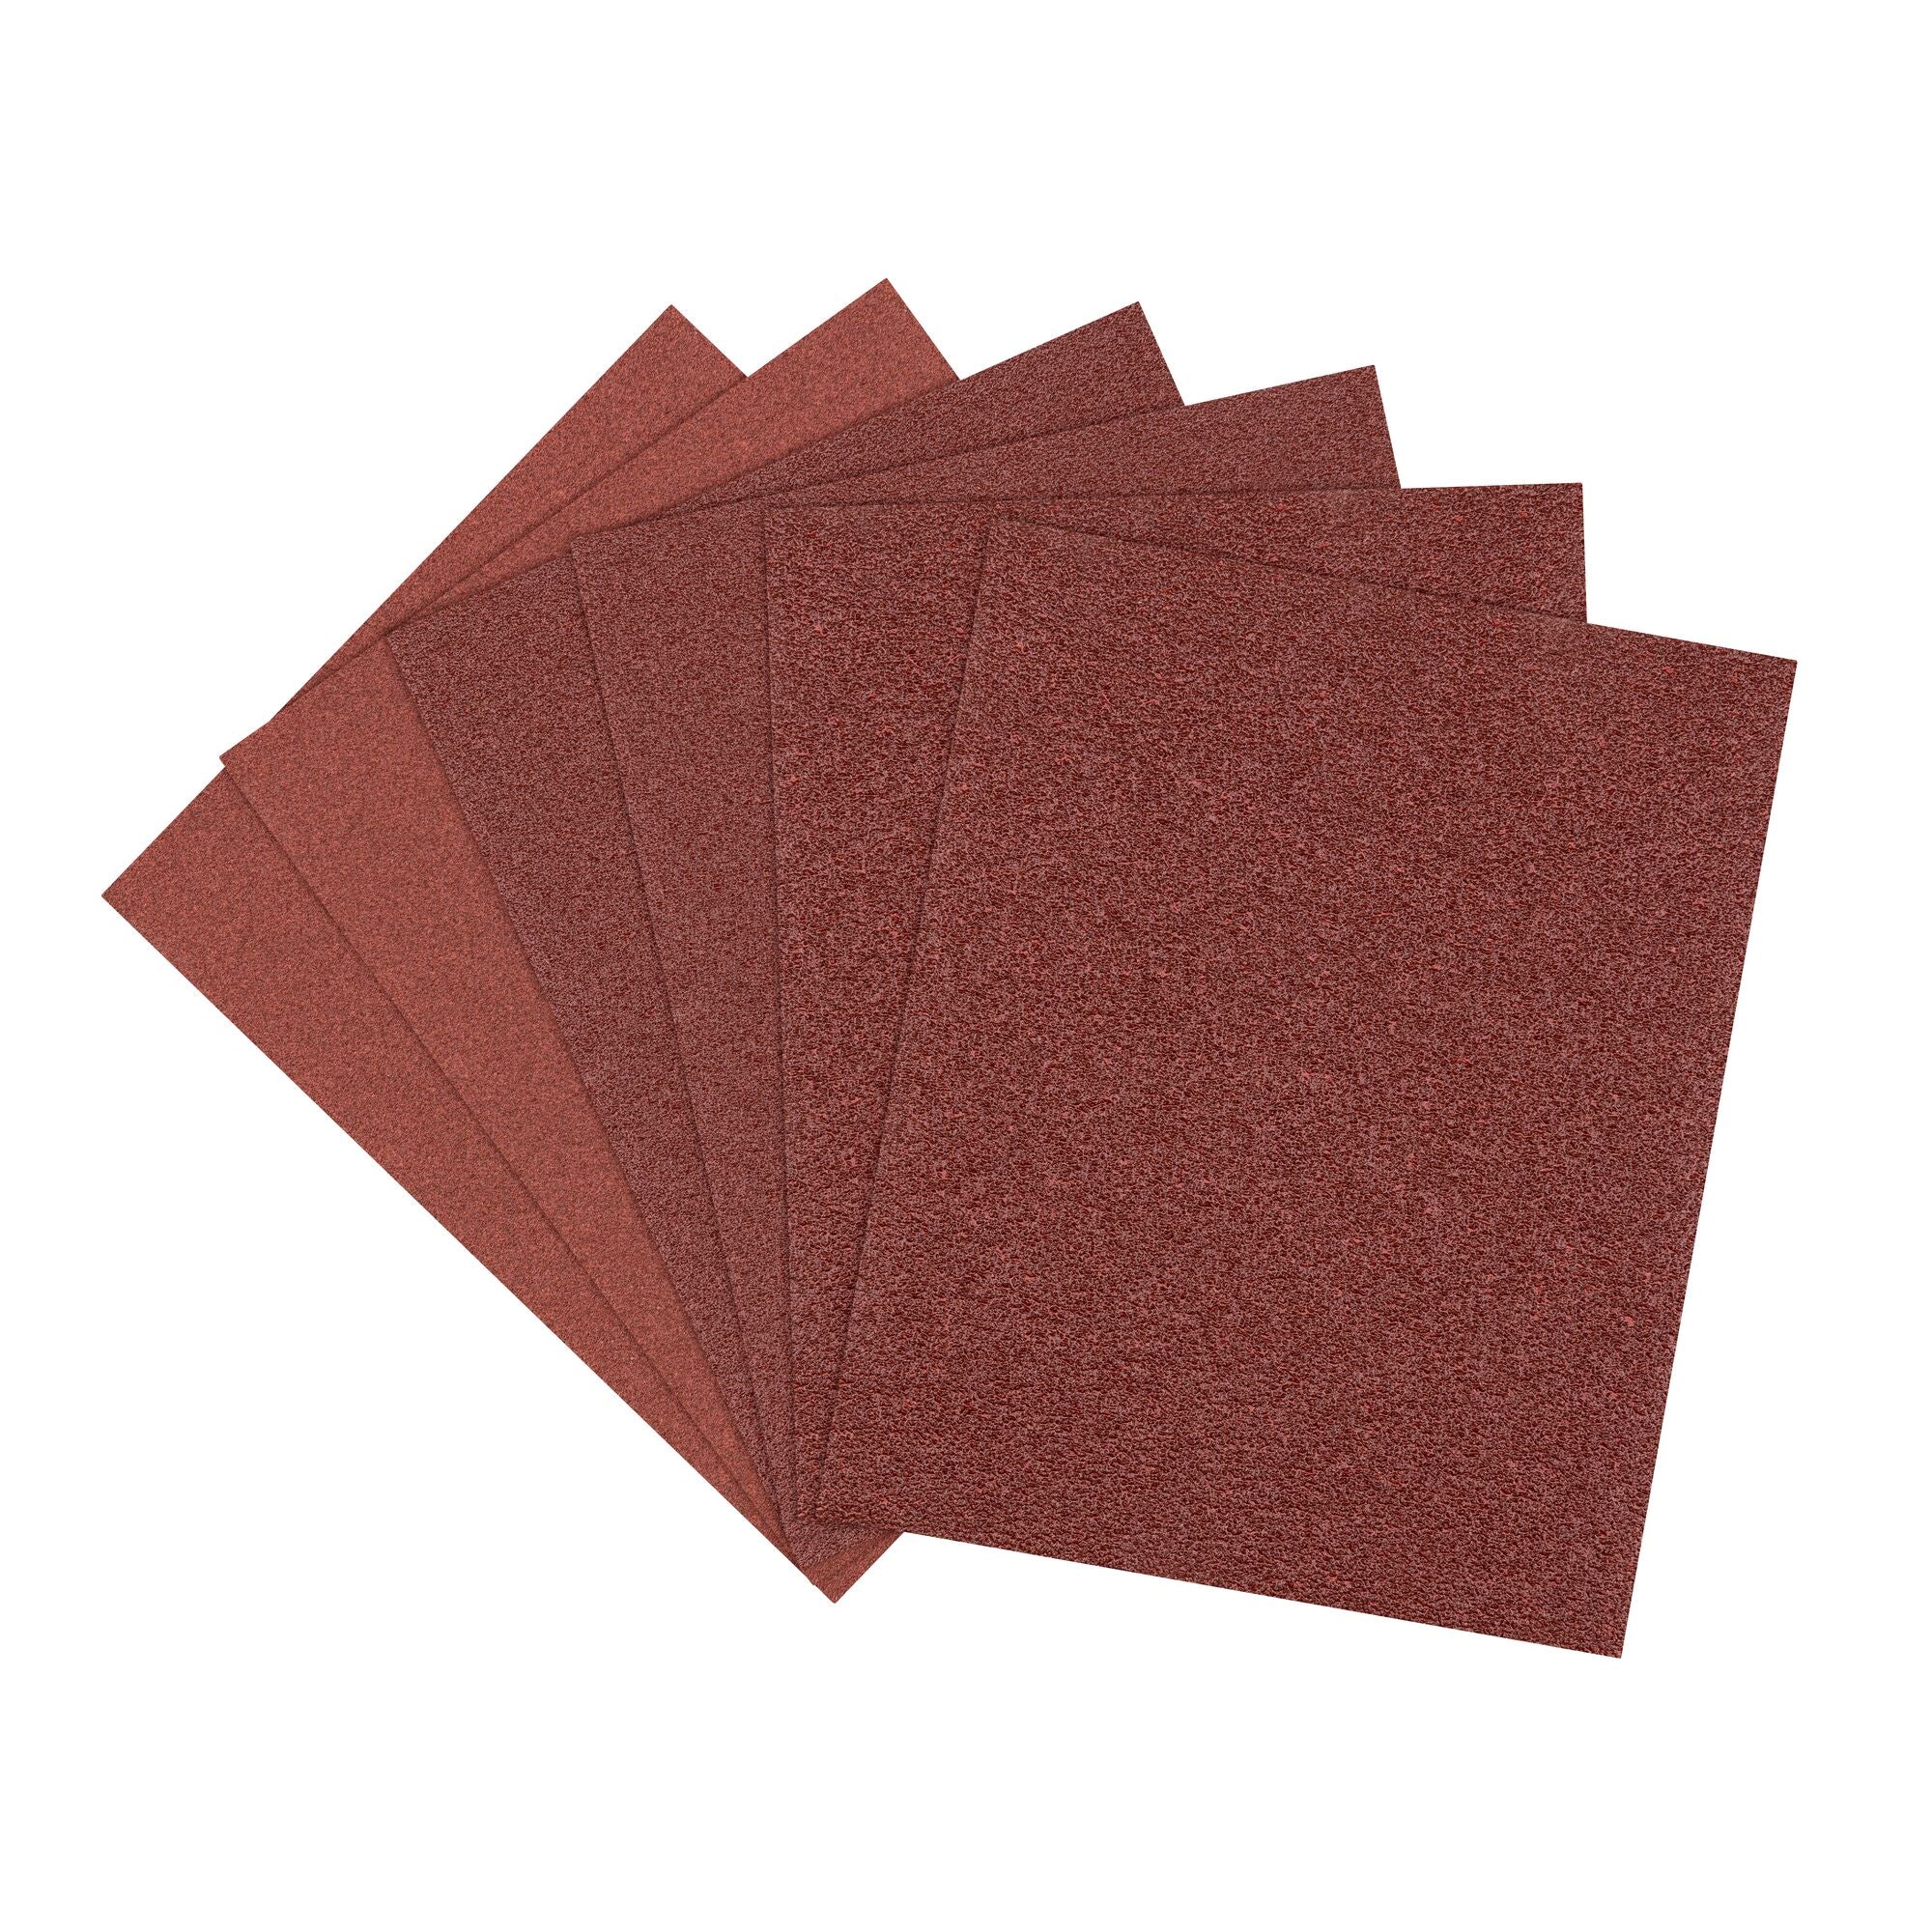 fanned out view of sandpaper assortment